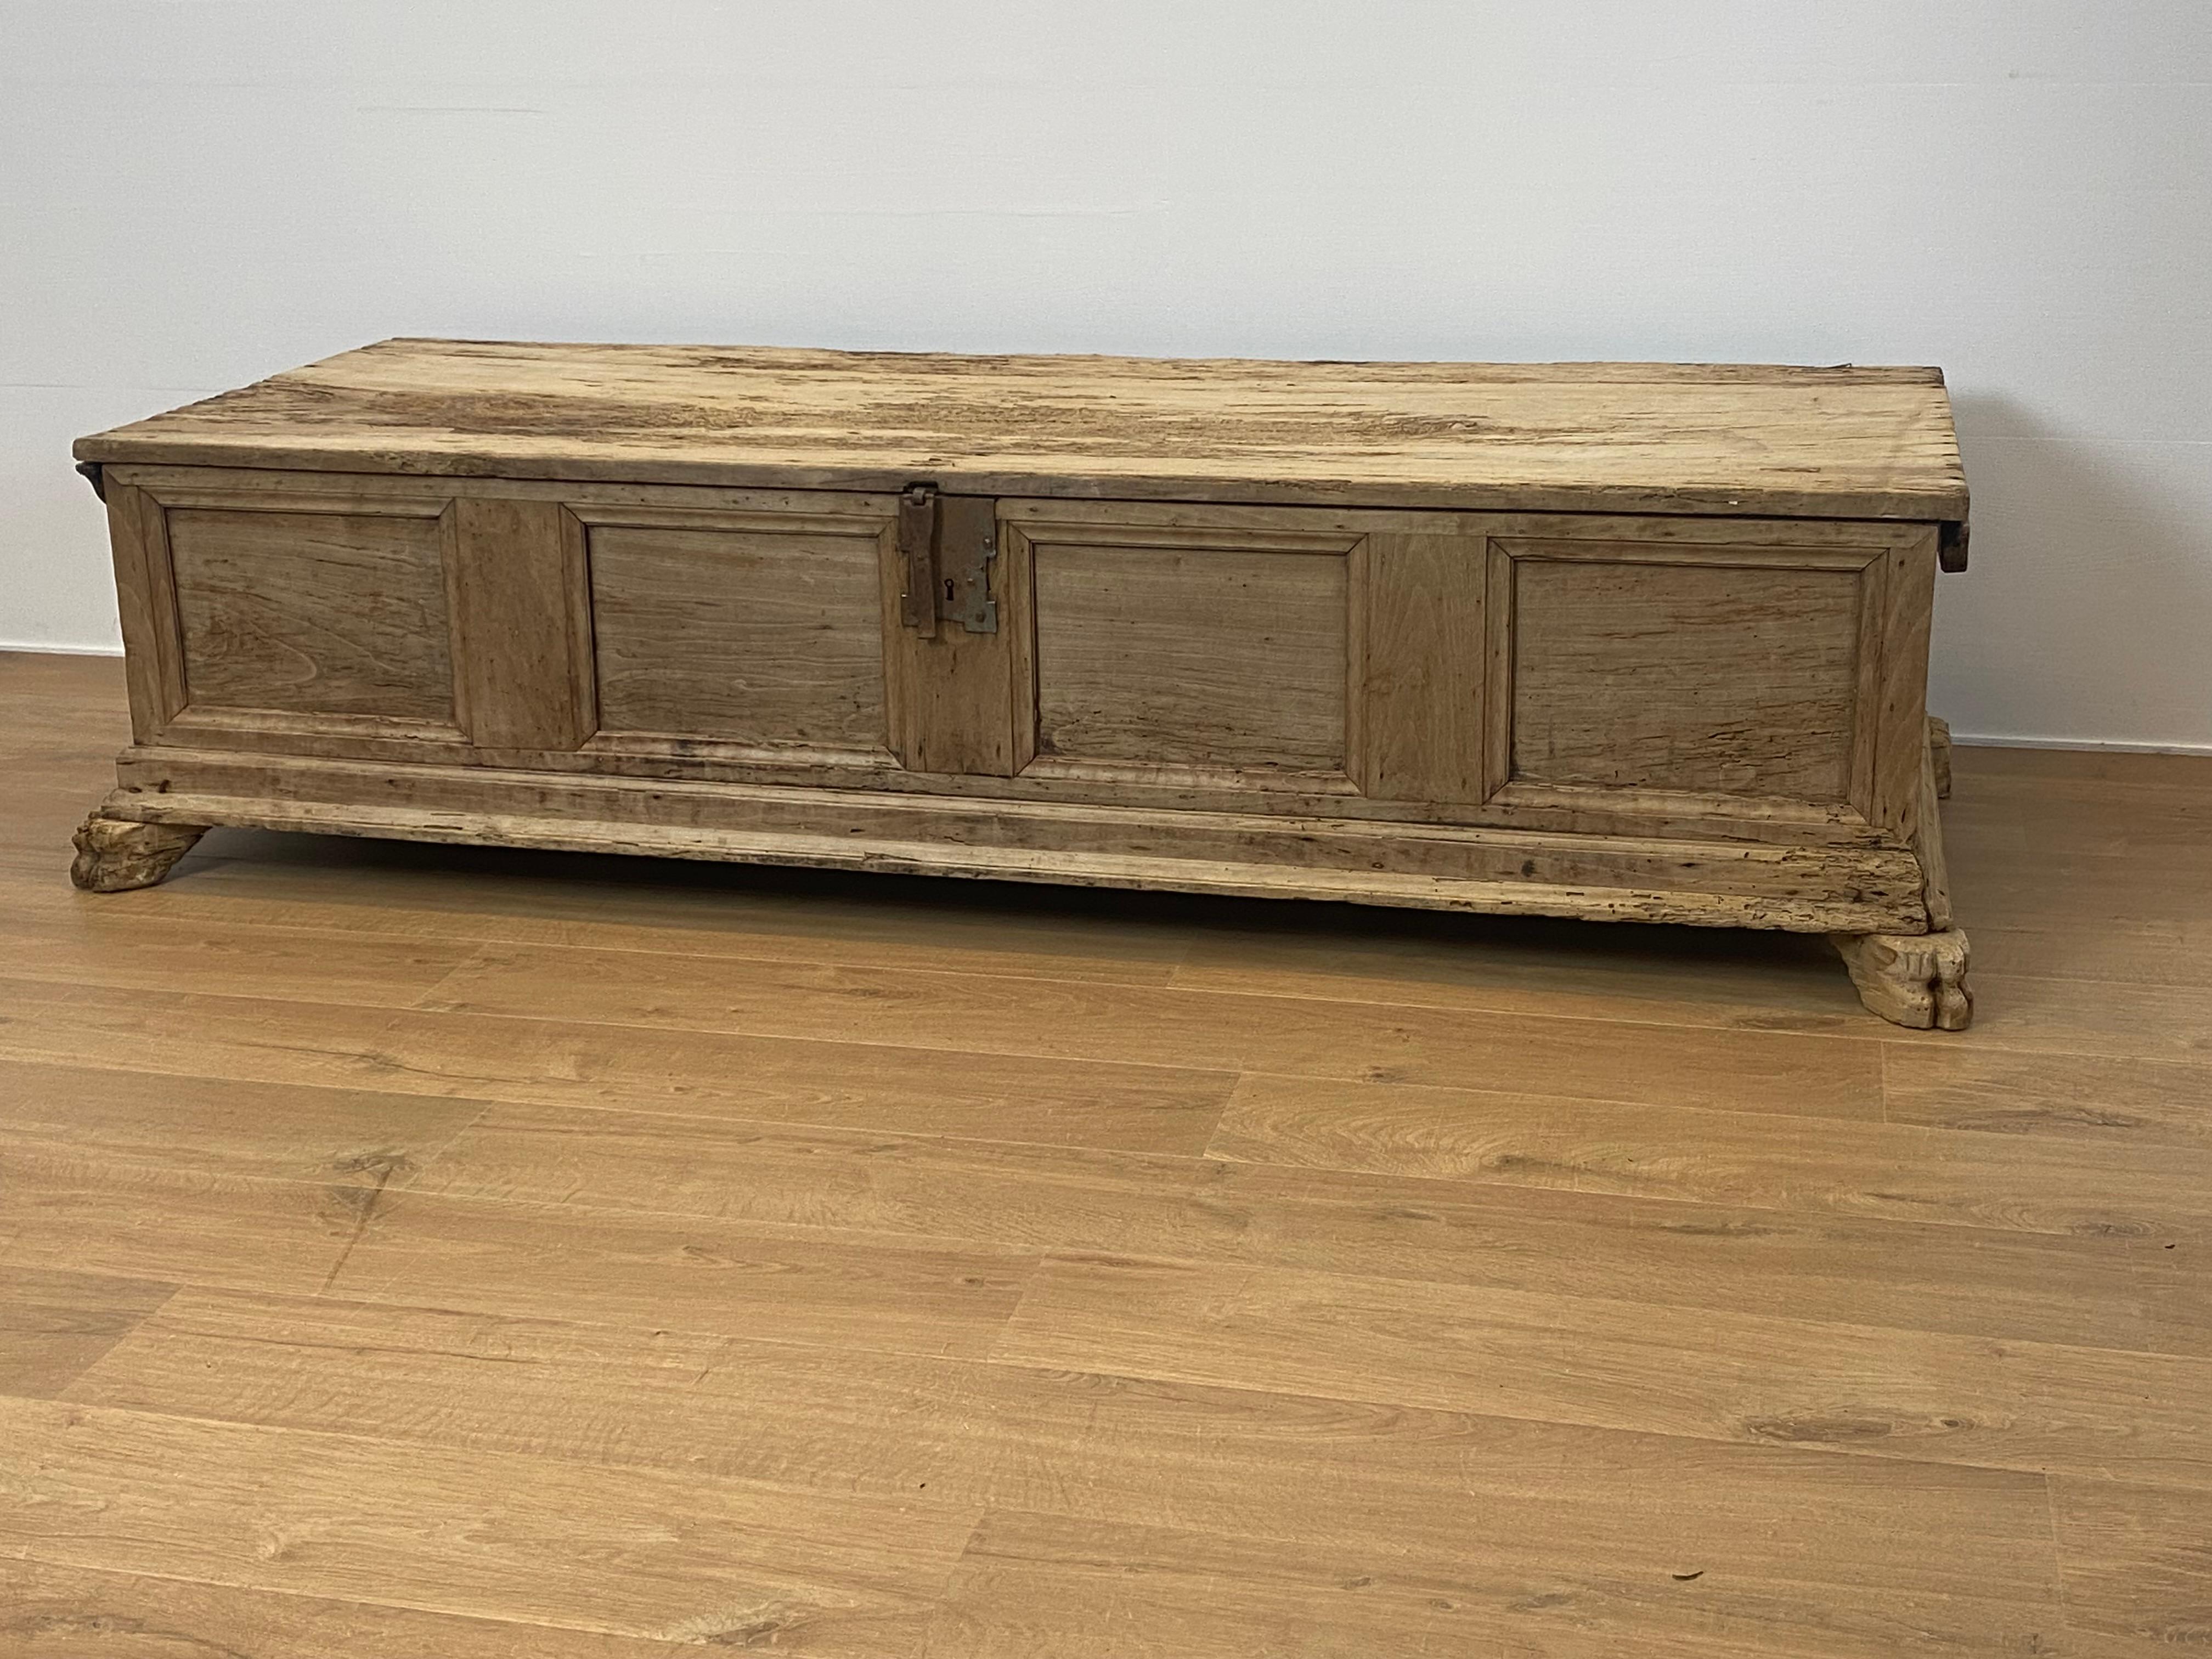 Exceptional Spanish Trunk in a bleached Chestnut Wood,from around 1890,

very simple lines and design, 4 panelled front , clawfeet and iron lock,

Can be used as a coffee table, beautiful and old wear of the wood.